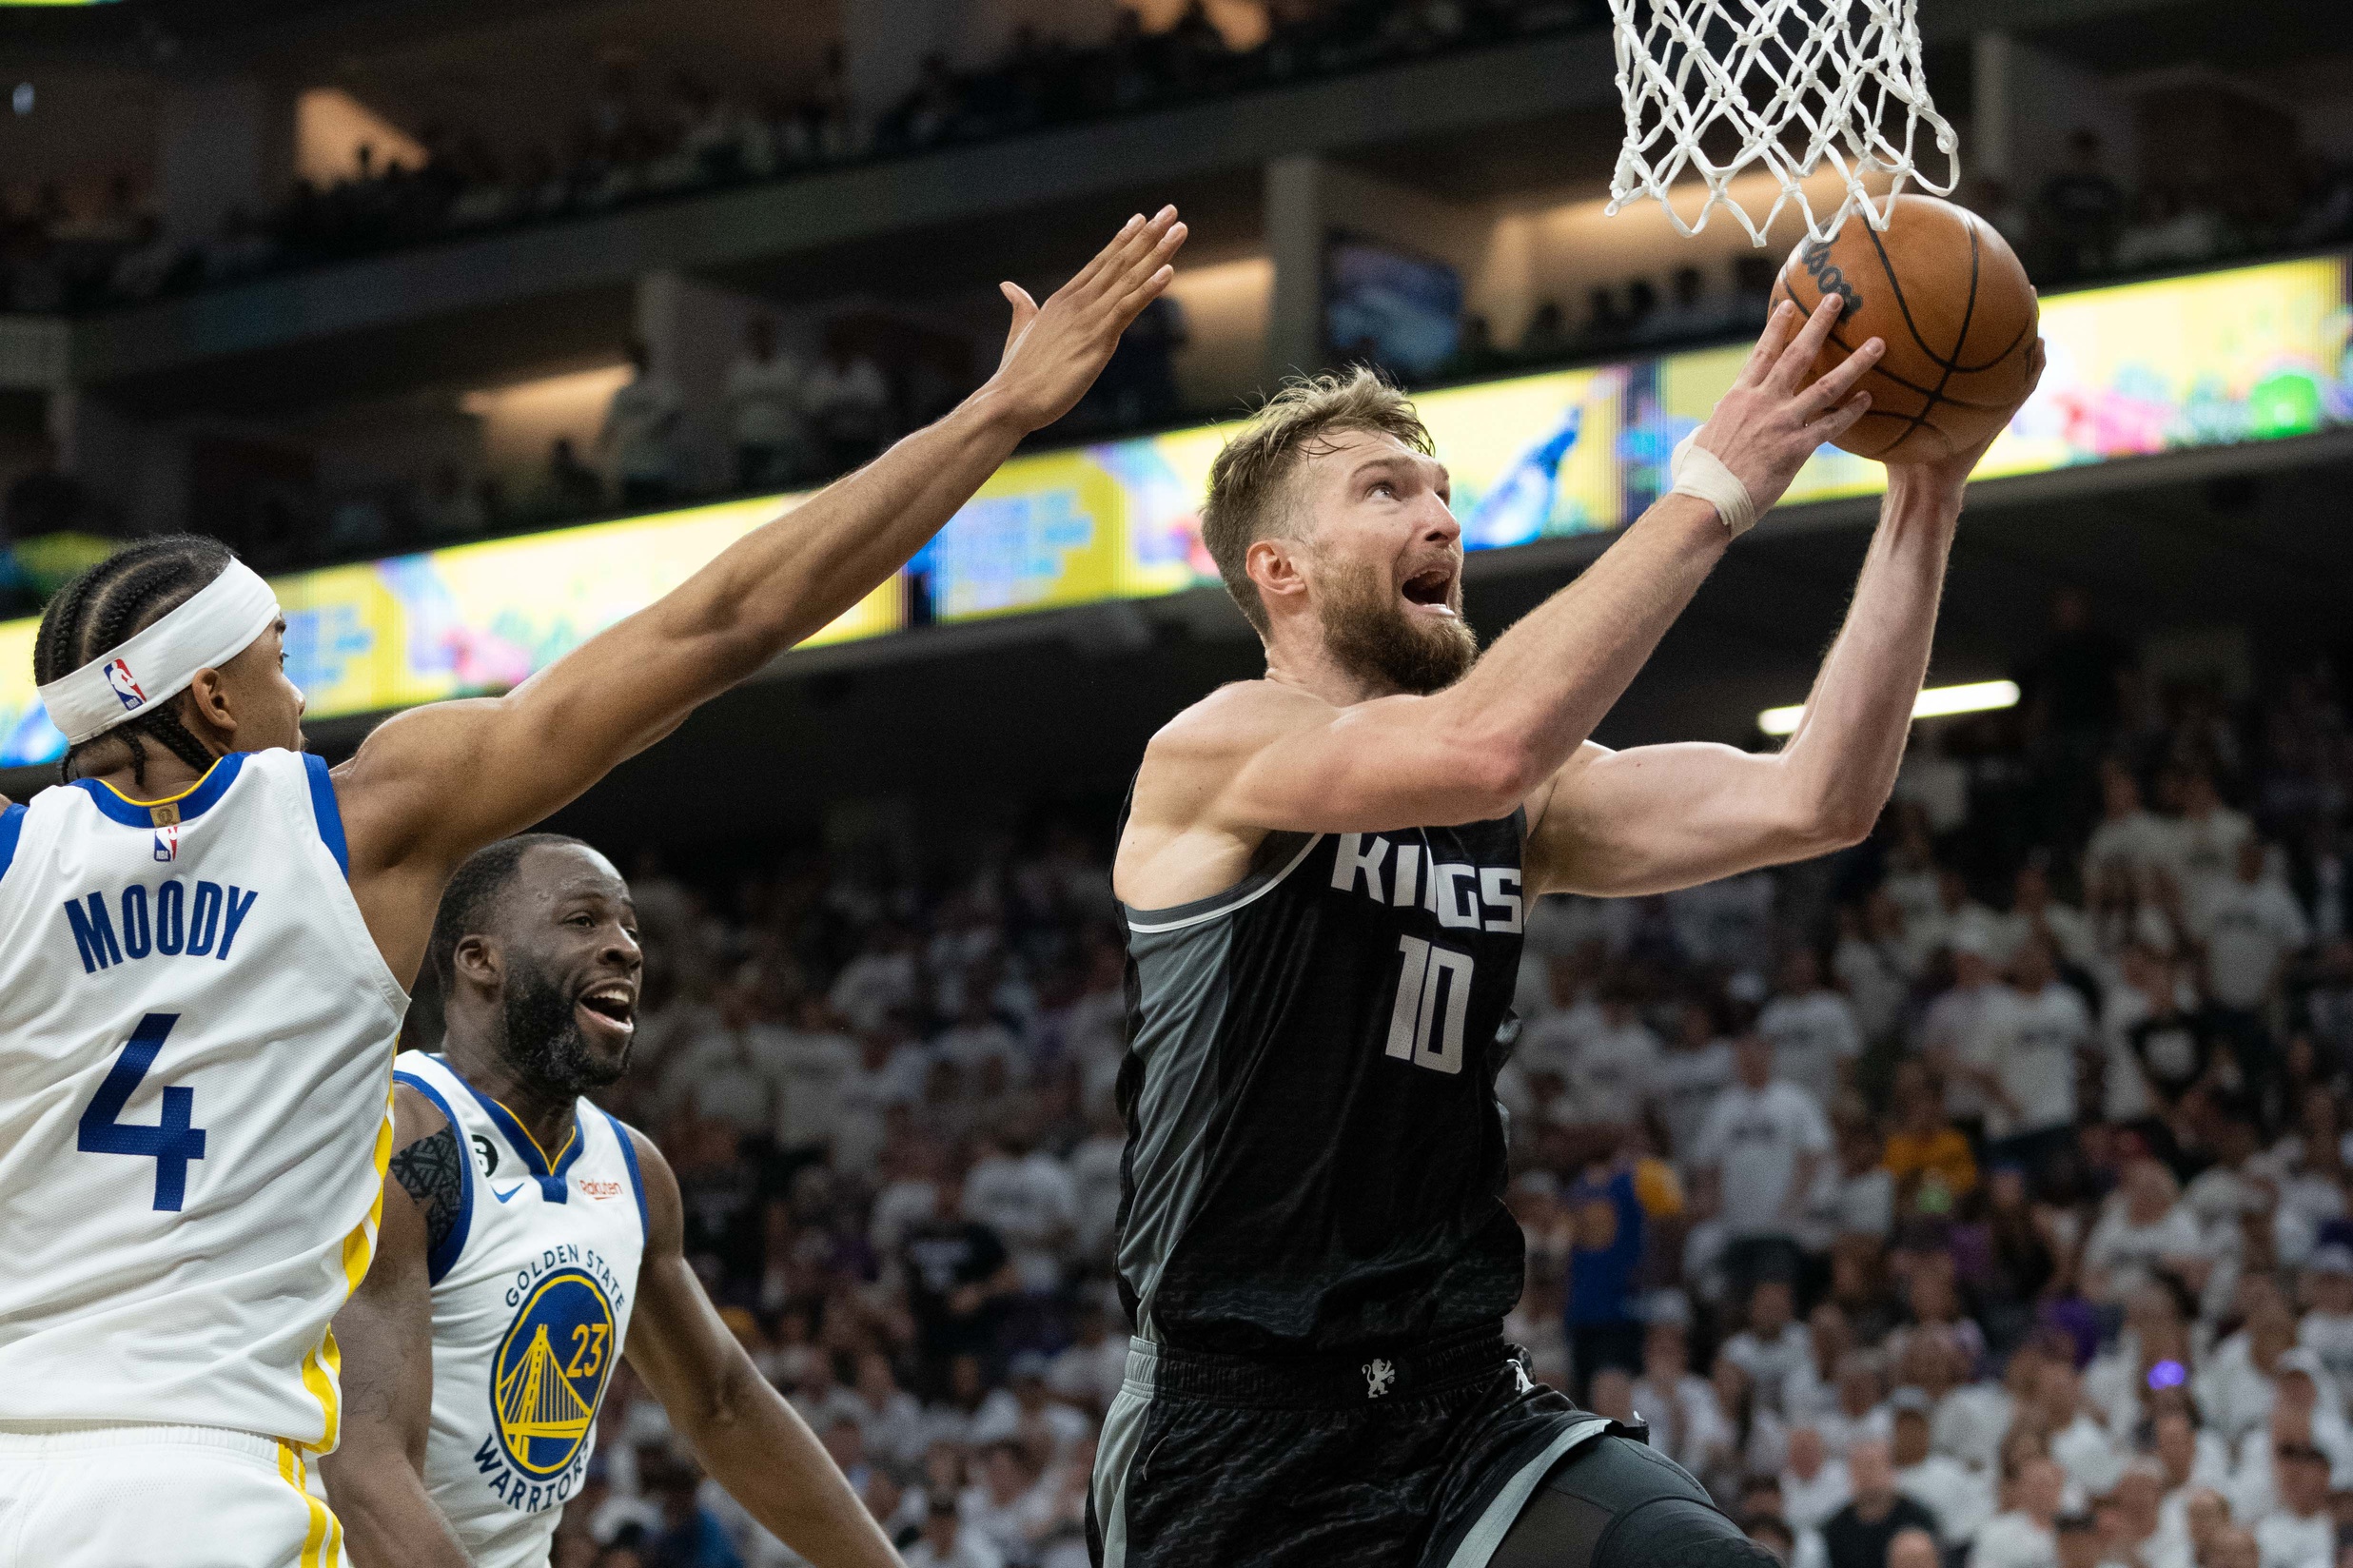 April 30, 2023; Sacramento, California, USA; Sacramento Kings forward Domantas Sabonis (10) shoots the basketball during the second quarter in game seven of the 2023 NBA playoffs first round against the Golden State Warriors at Golden 1 Center. Mandatory Credit: Kyle Terada-USA TODAY Sports